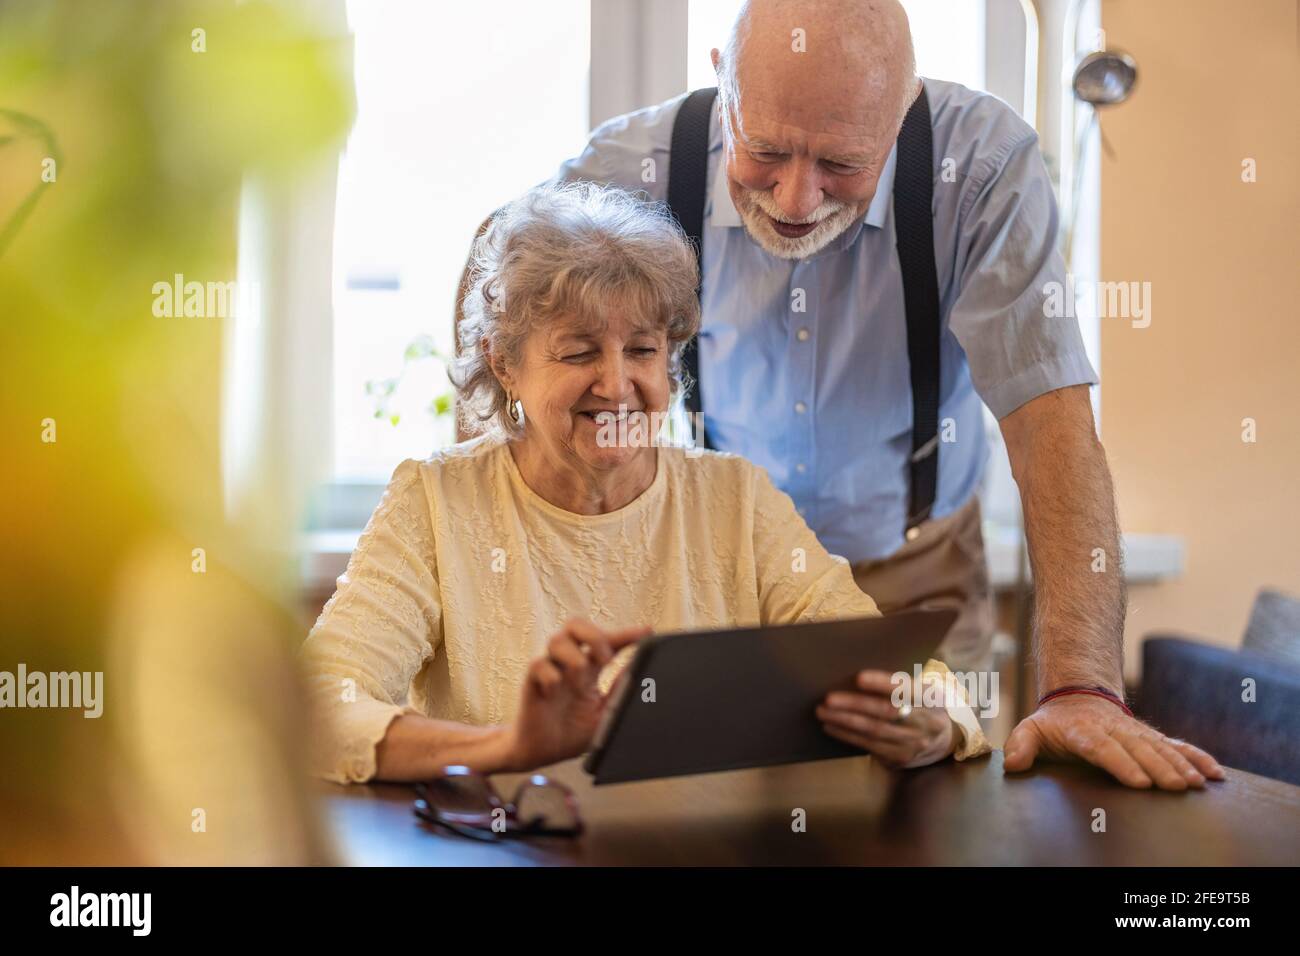 Happy senior couple using digital tablet at home Stock Photo